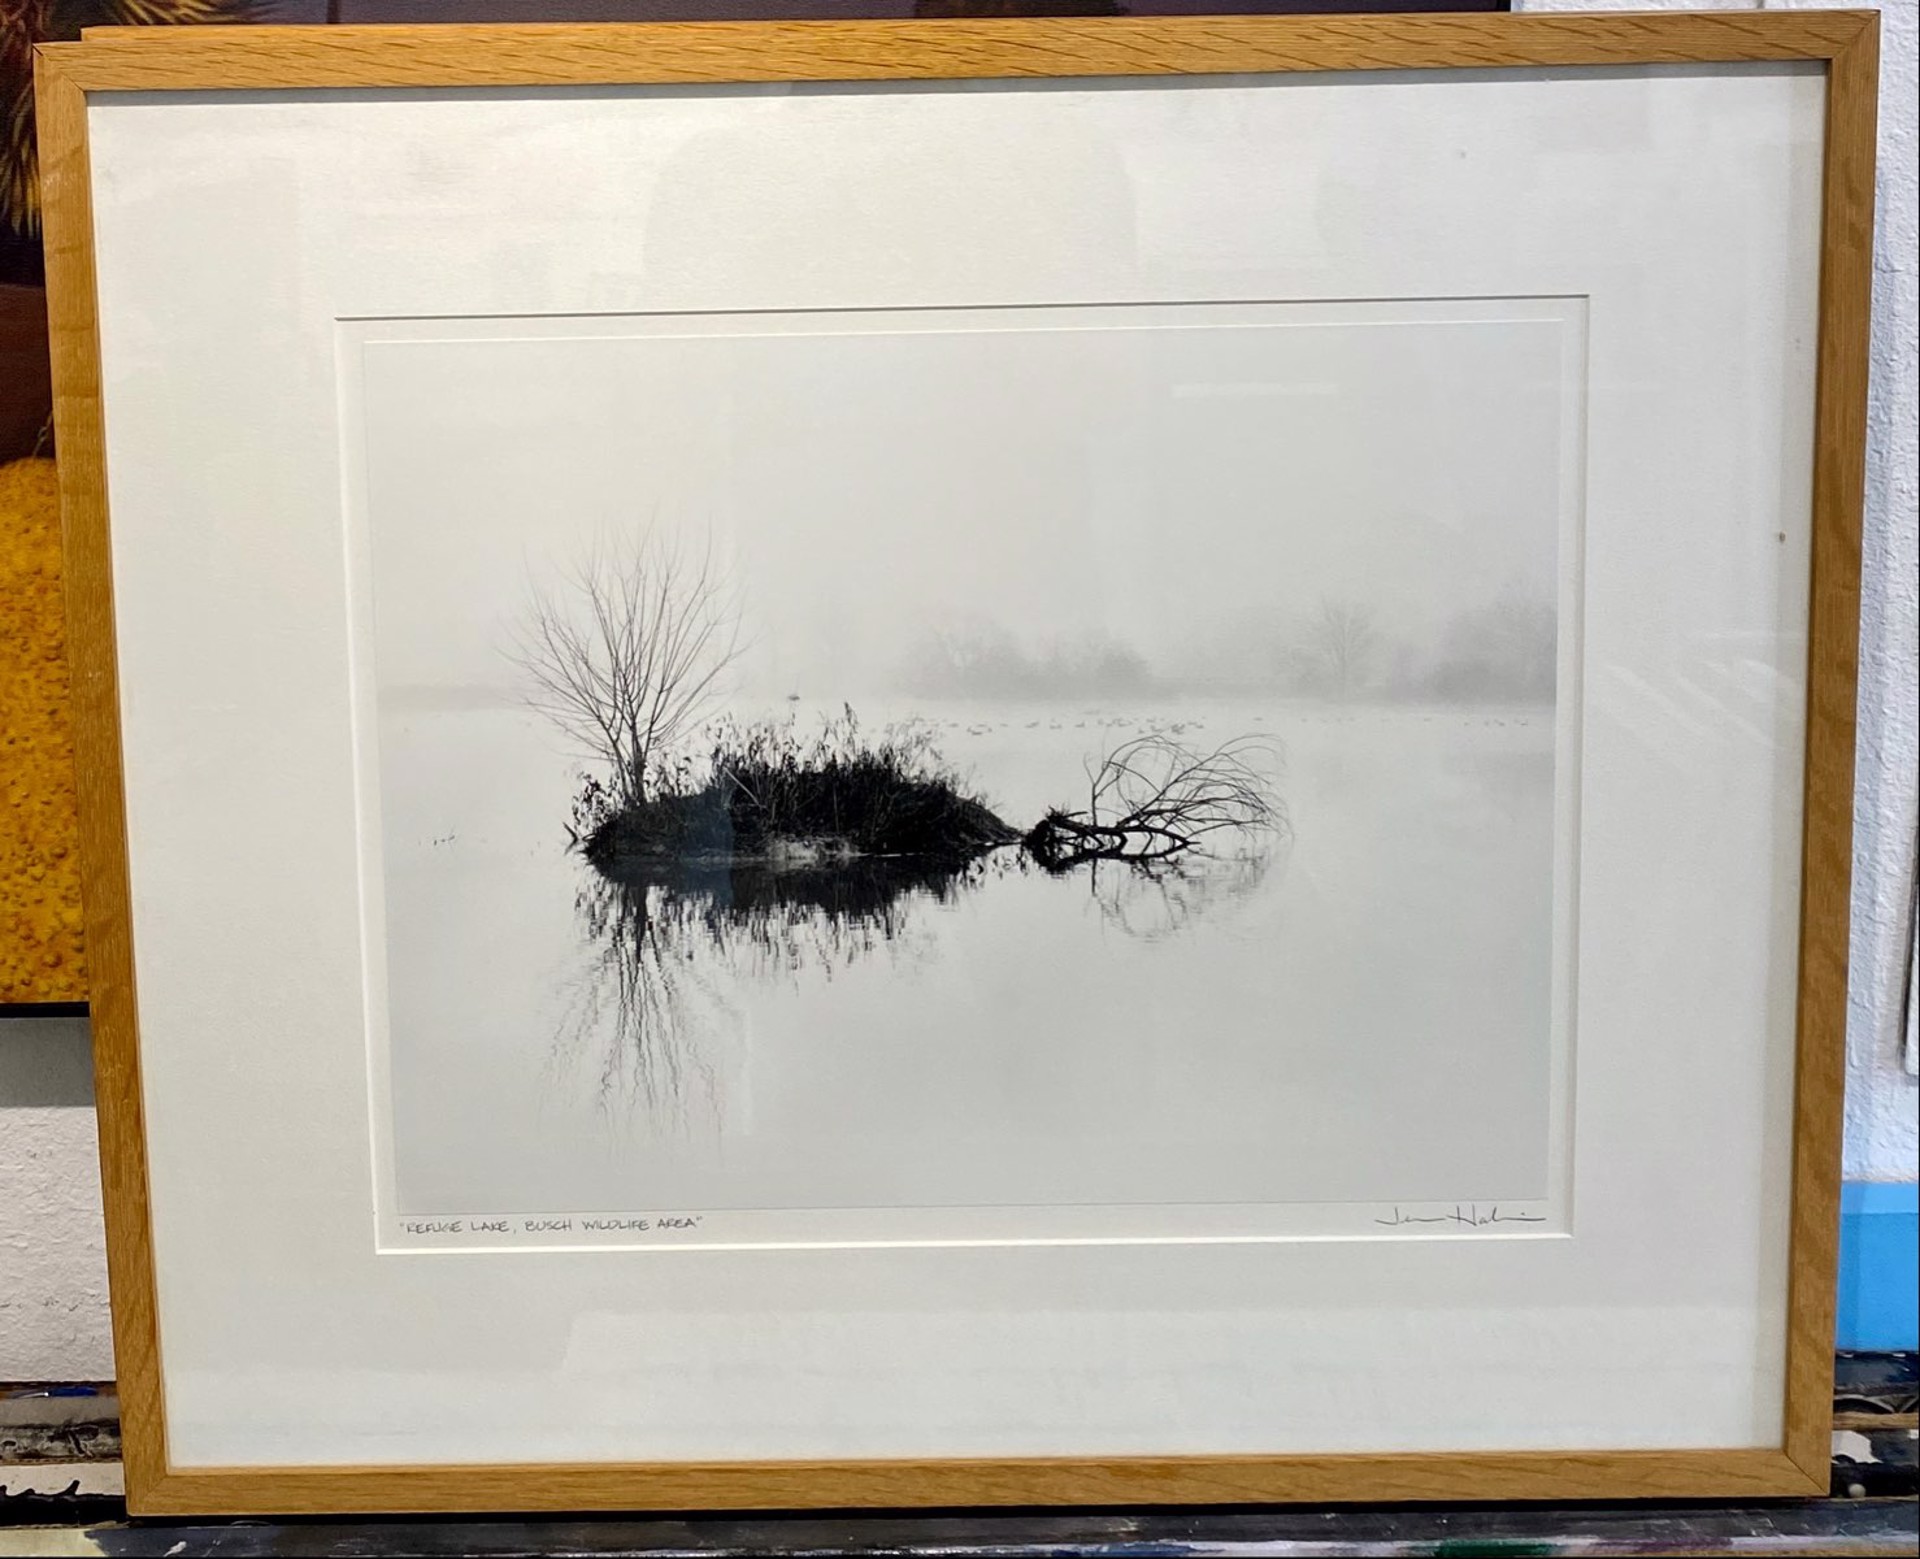 "Refuge Lake, Busch Wilderness Area" by Jerome Hawkins circa 1986 by Art One Resale Inventory